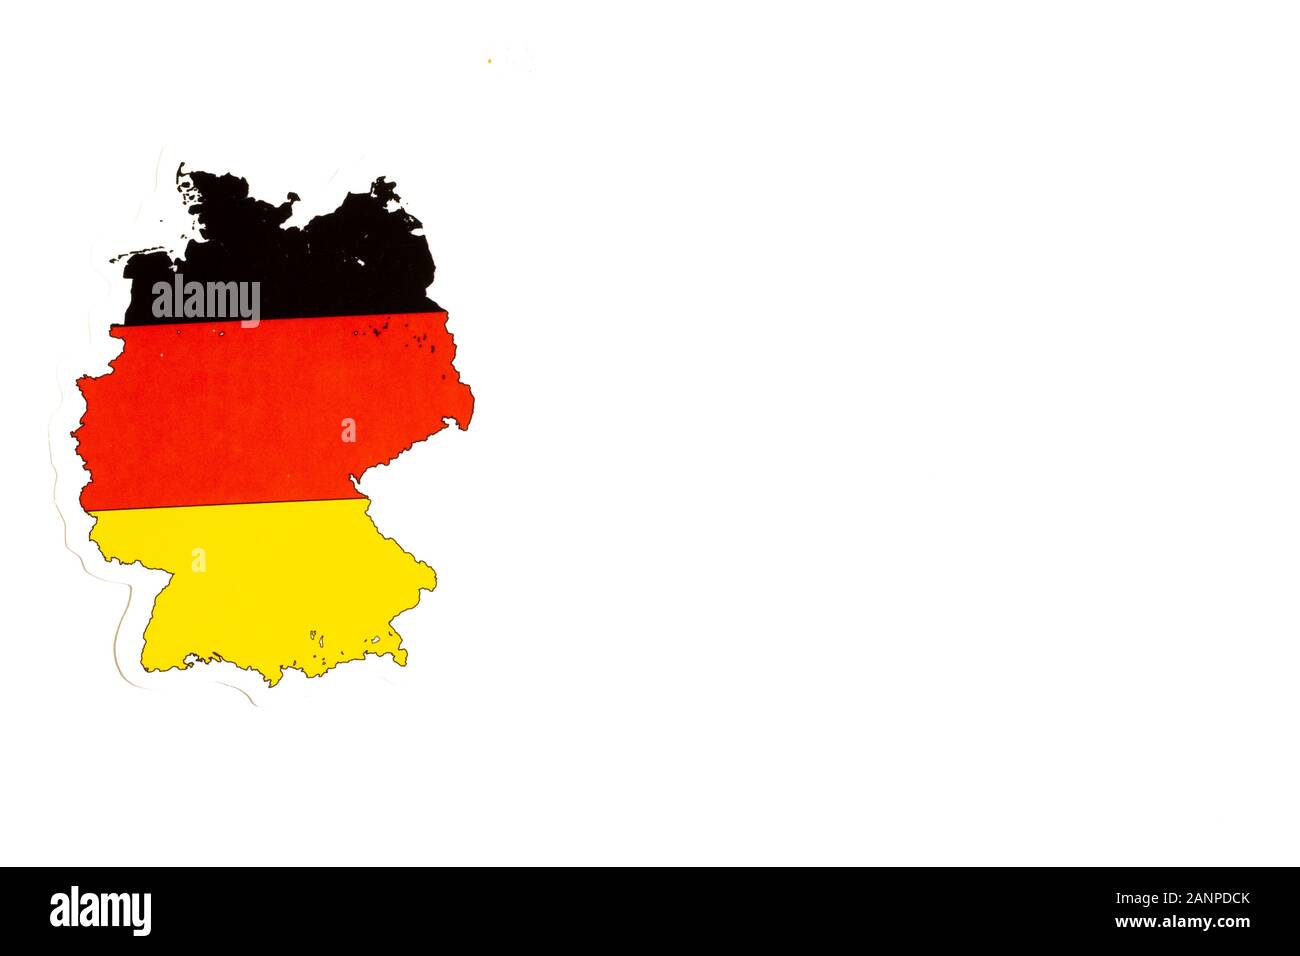 Los Angeles, California, USA - 17 January 2020: National flag of Germany. Country outline on white background with copy space. Politics illustration Stock Photo